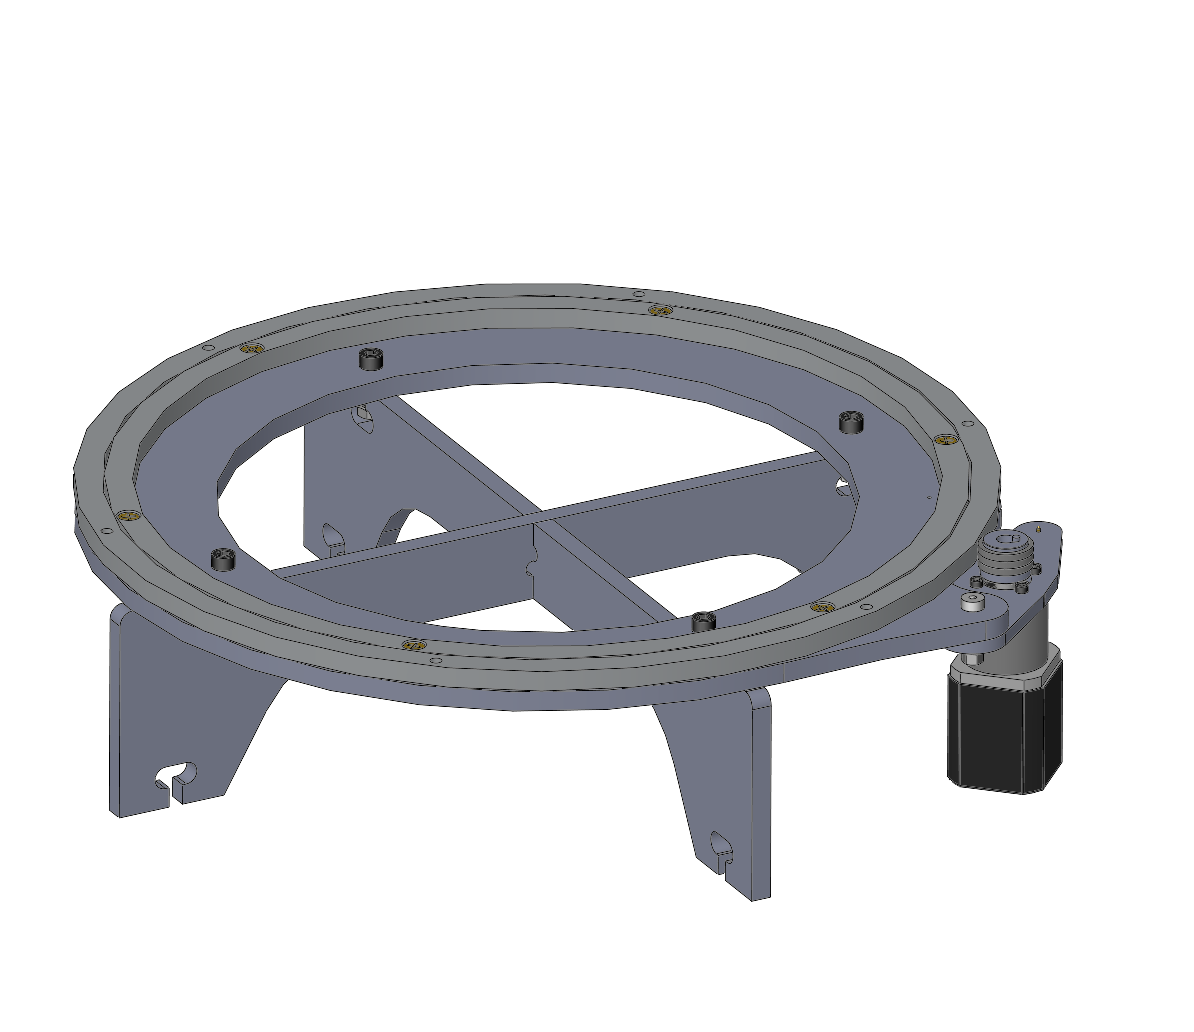 ../_images/Ring-Turntable-392mm.PNG